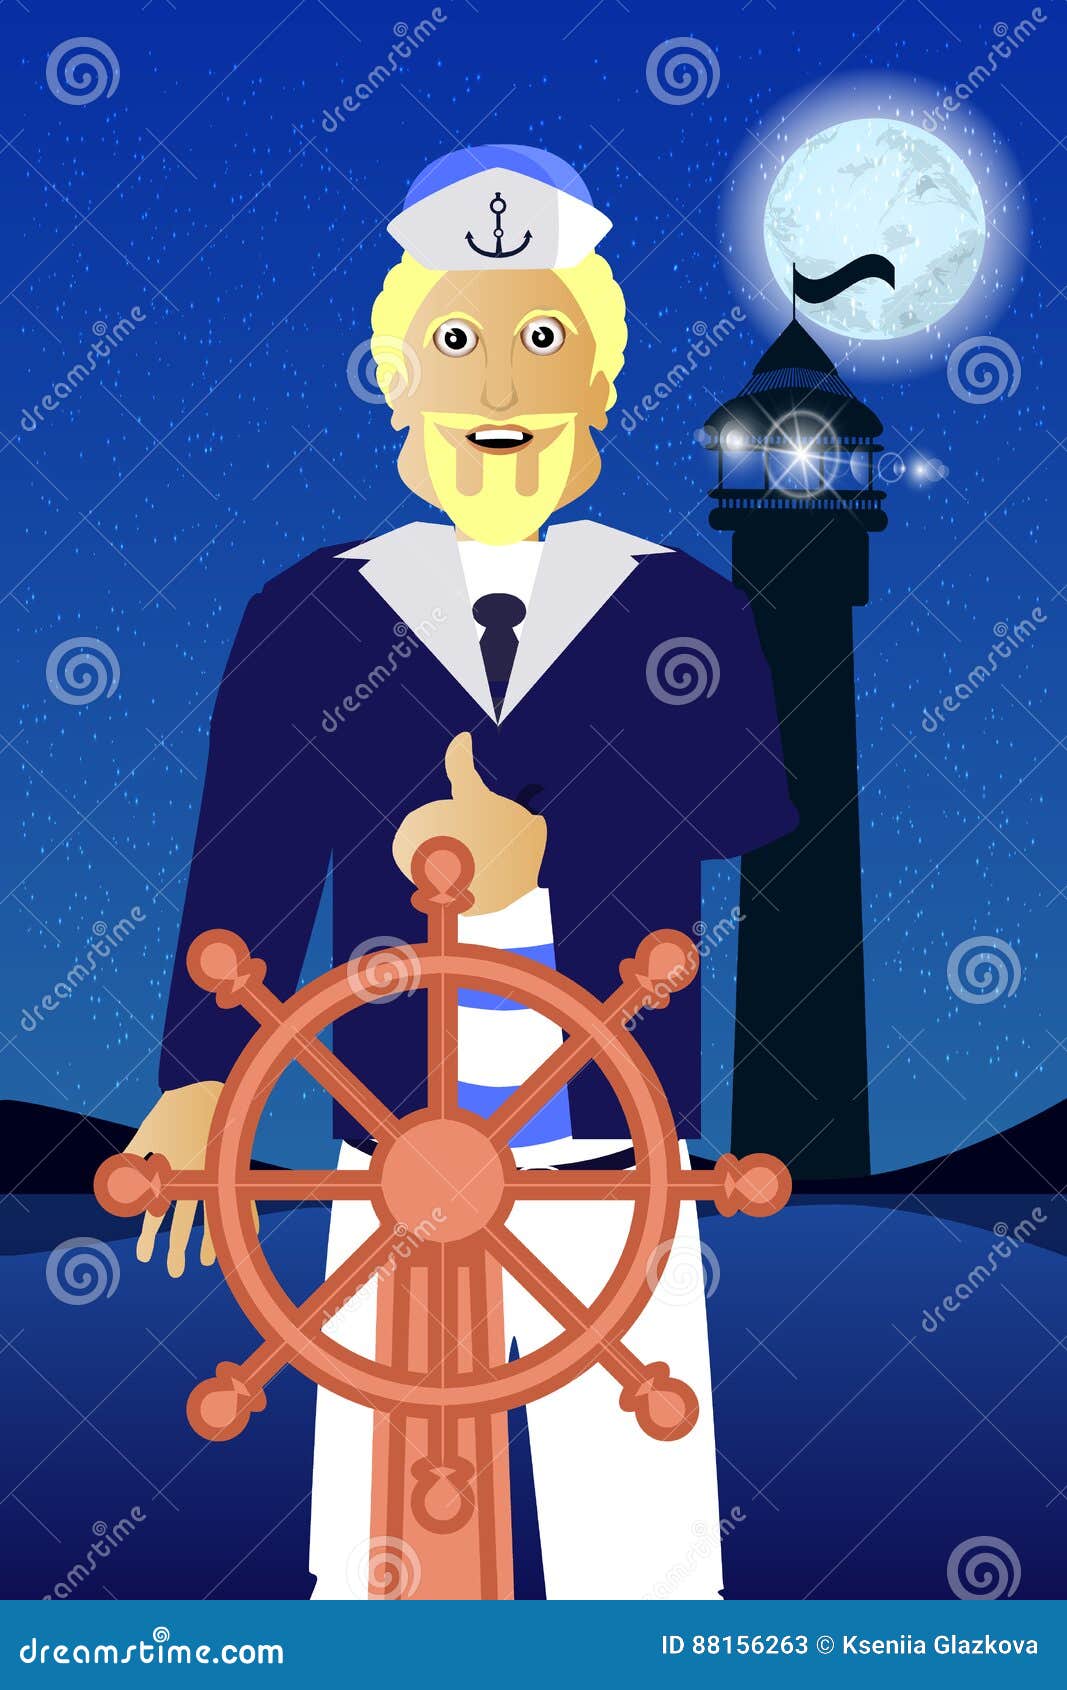 The Captain at the Helm. Management Stock Vector - Illustration of guidance, controller: 88156263